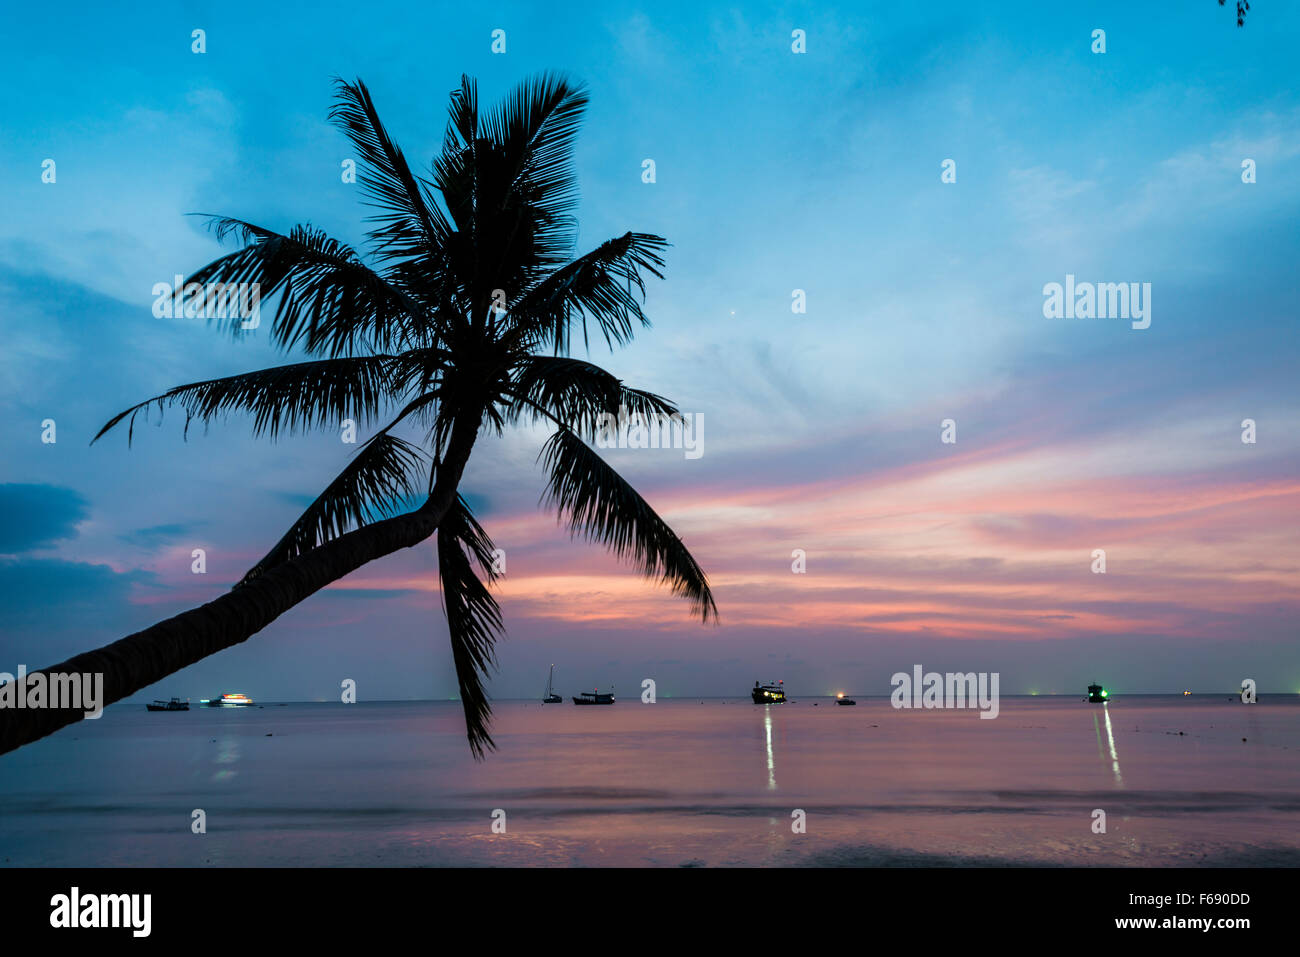 Palm tree at sunset, by the sea, South China Sea, Gulf of Thailand, Koh Tao, Thailand Stock Photo